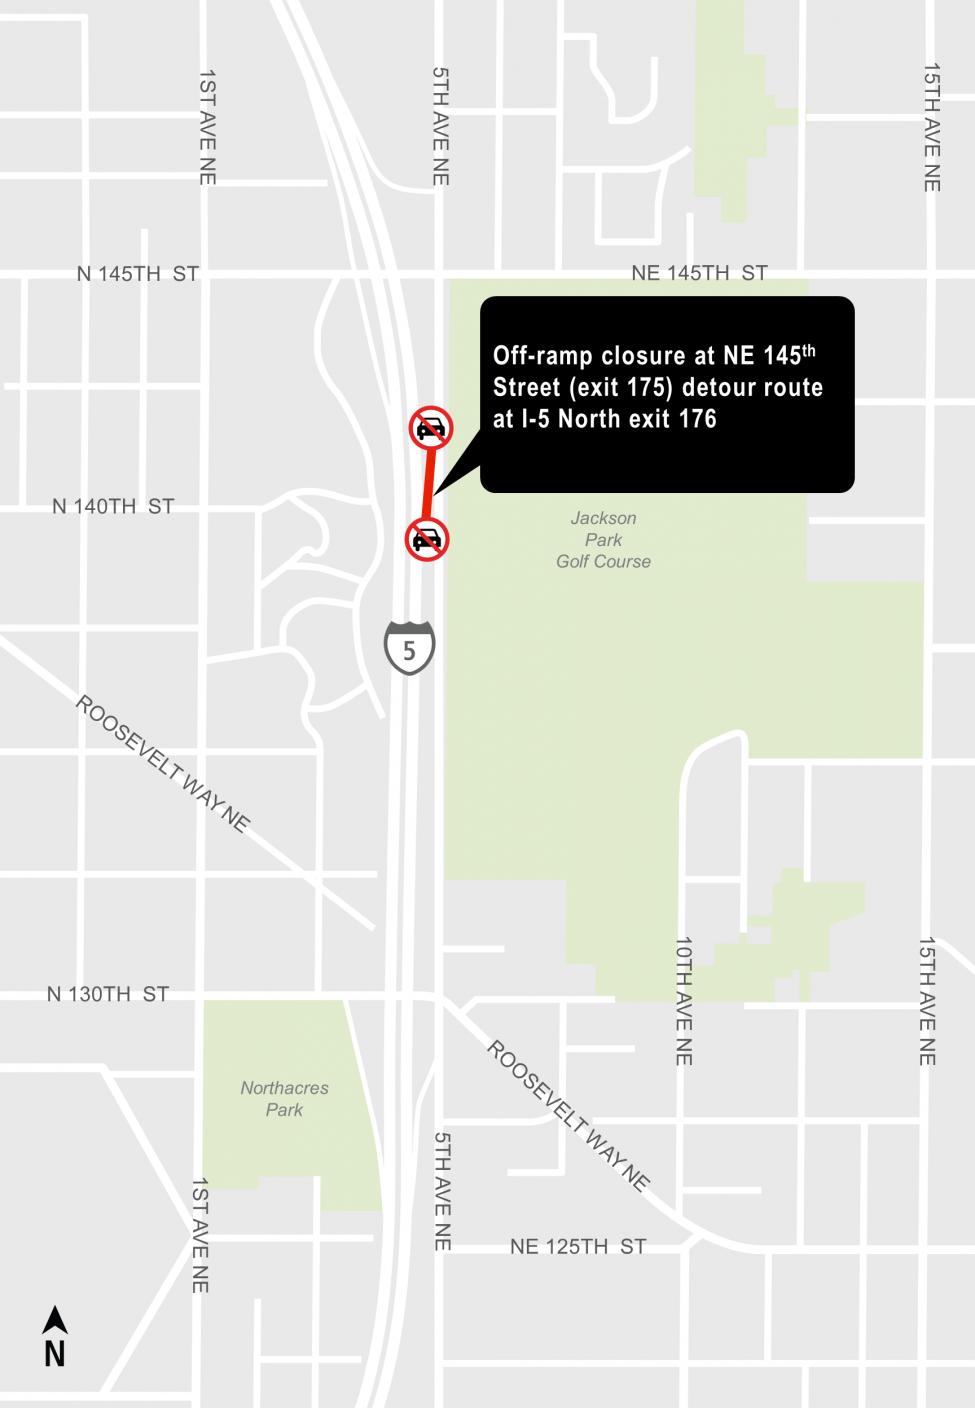 Map of lane and off-ramp closure at northbound Interstate 5 and Northeast 145th Street, exit 175.